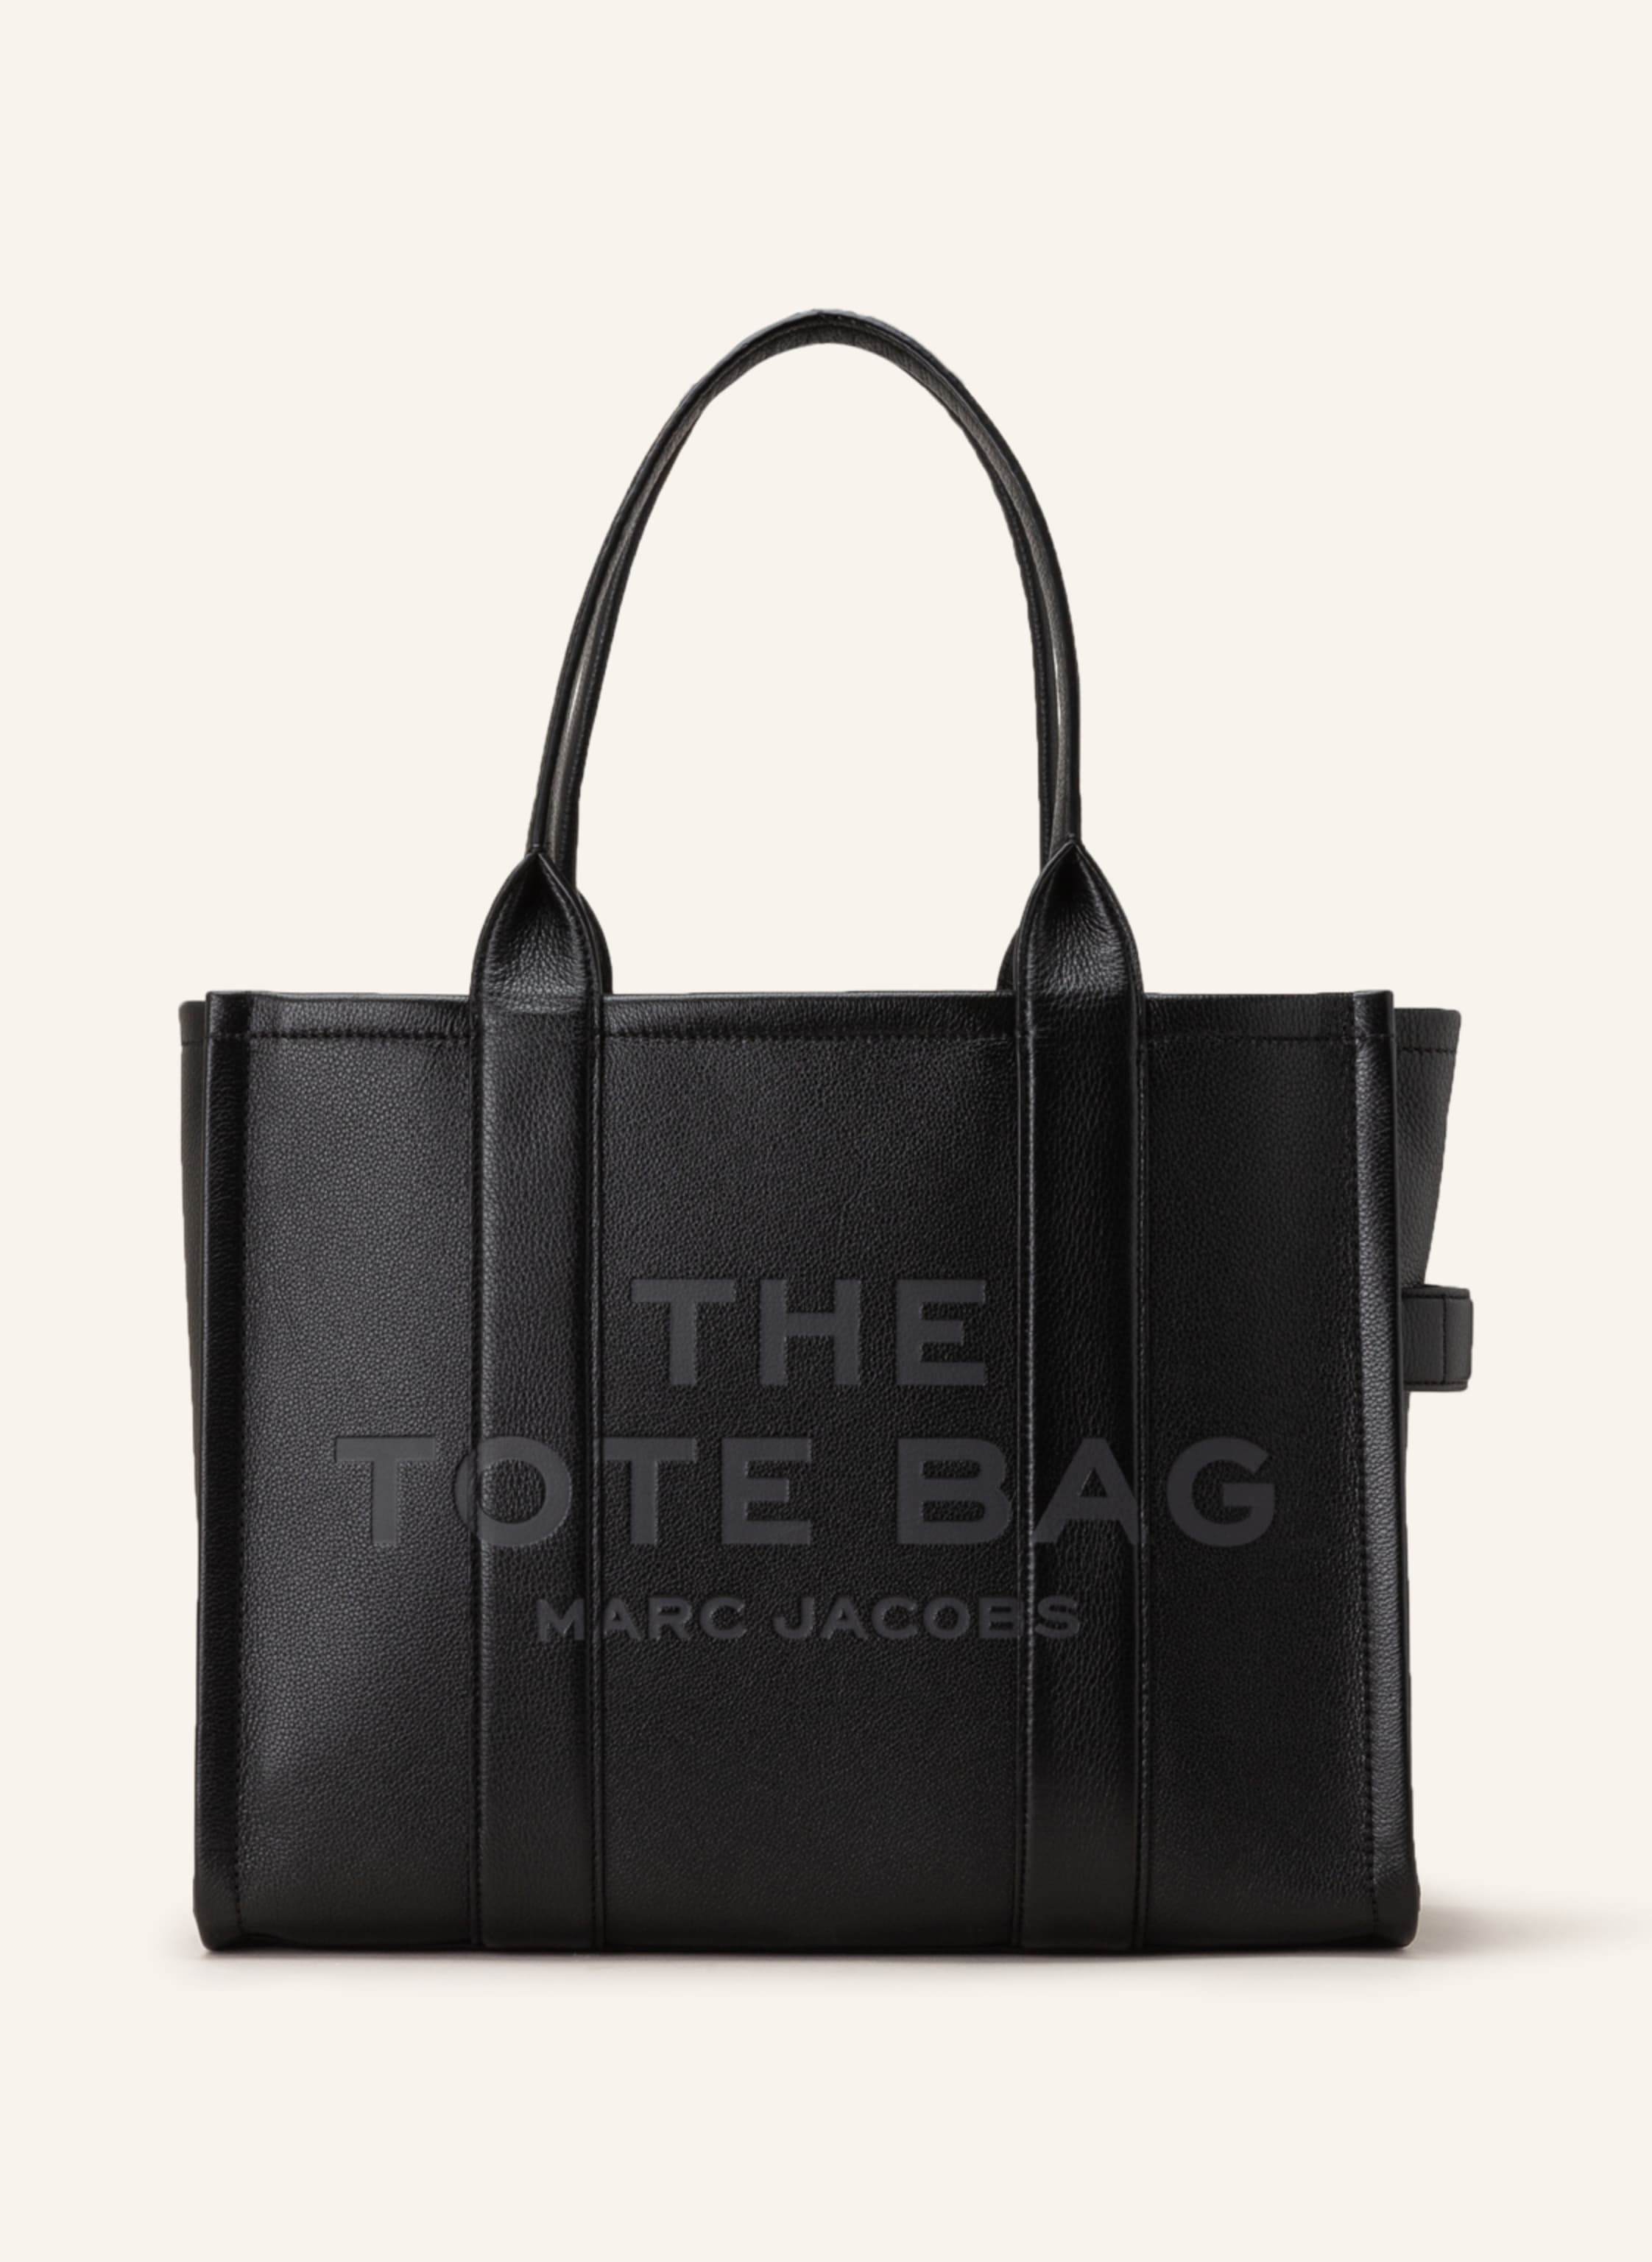 New Marc Jacobs Black Leather The Commuter Circle Crossbody Bag~ Limited  Edition | eBay